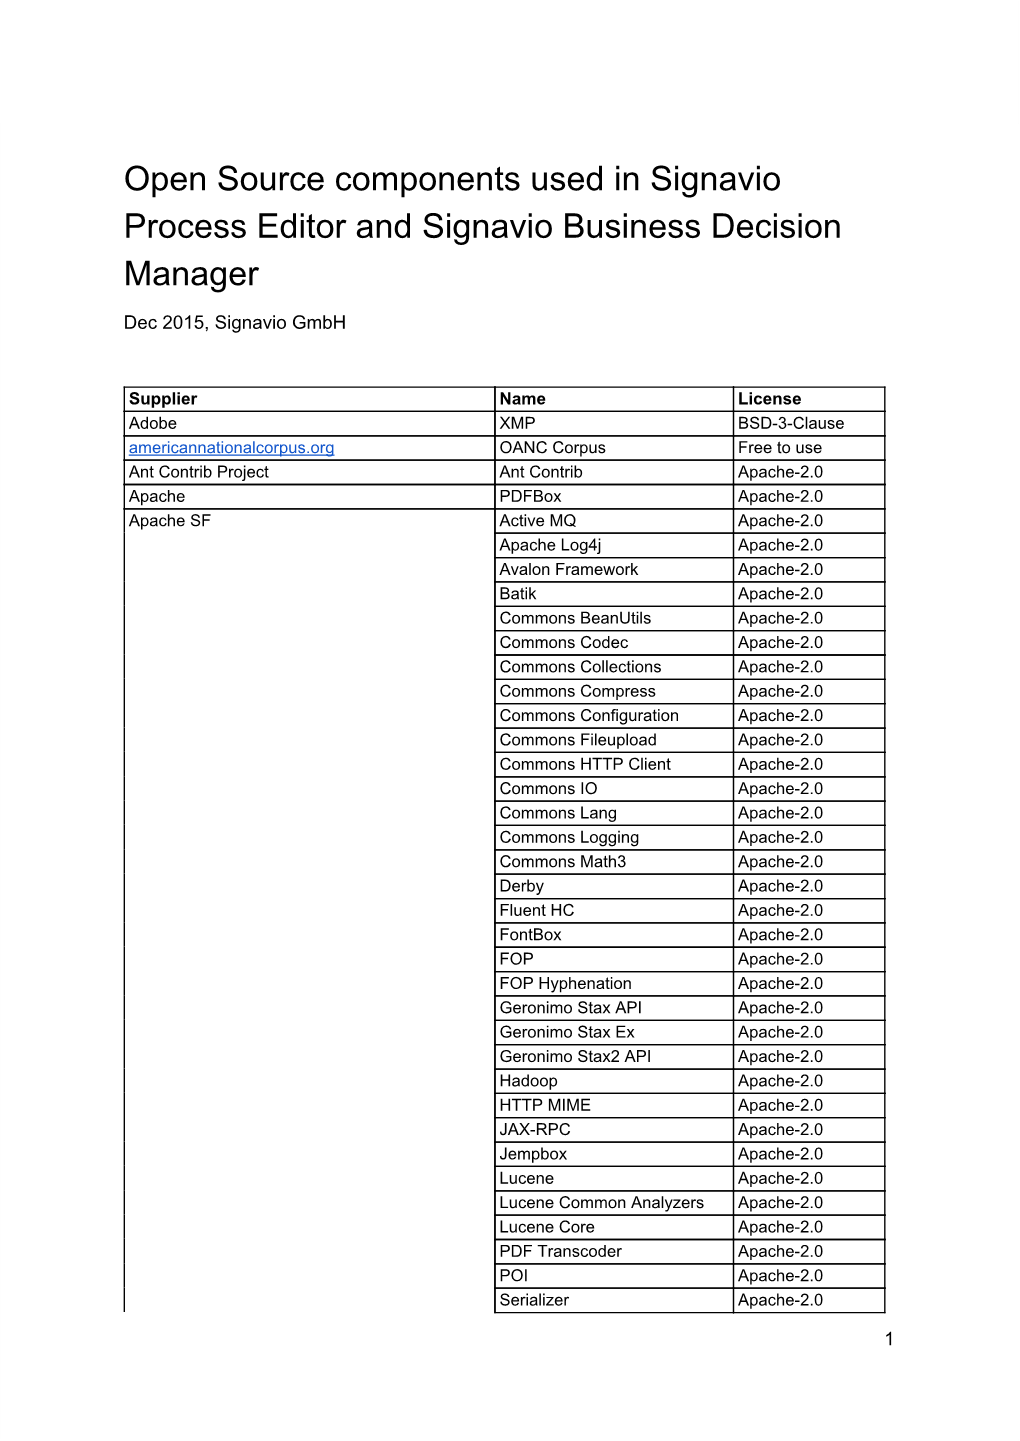 Open Source Components Used in Signavio Process Editor and Signavio Business Decision Manager